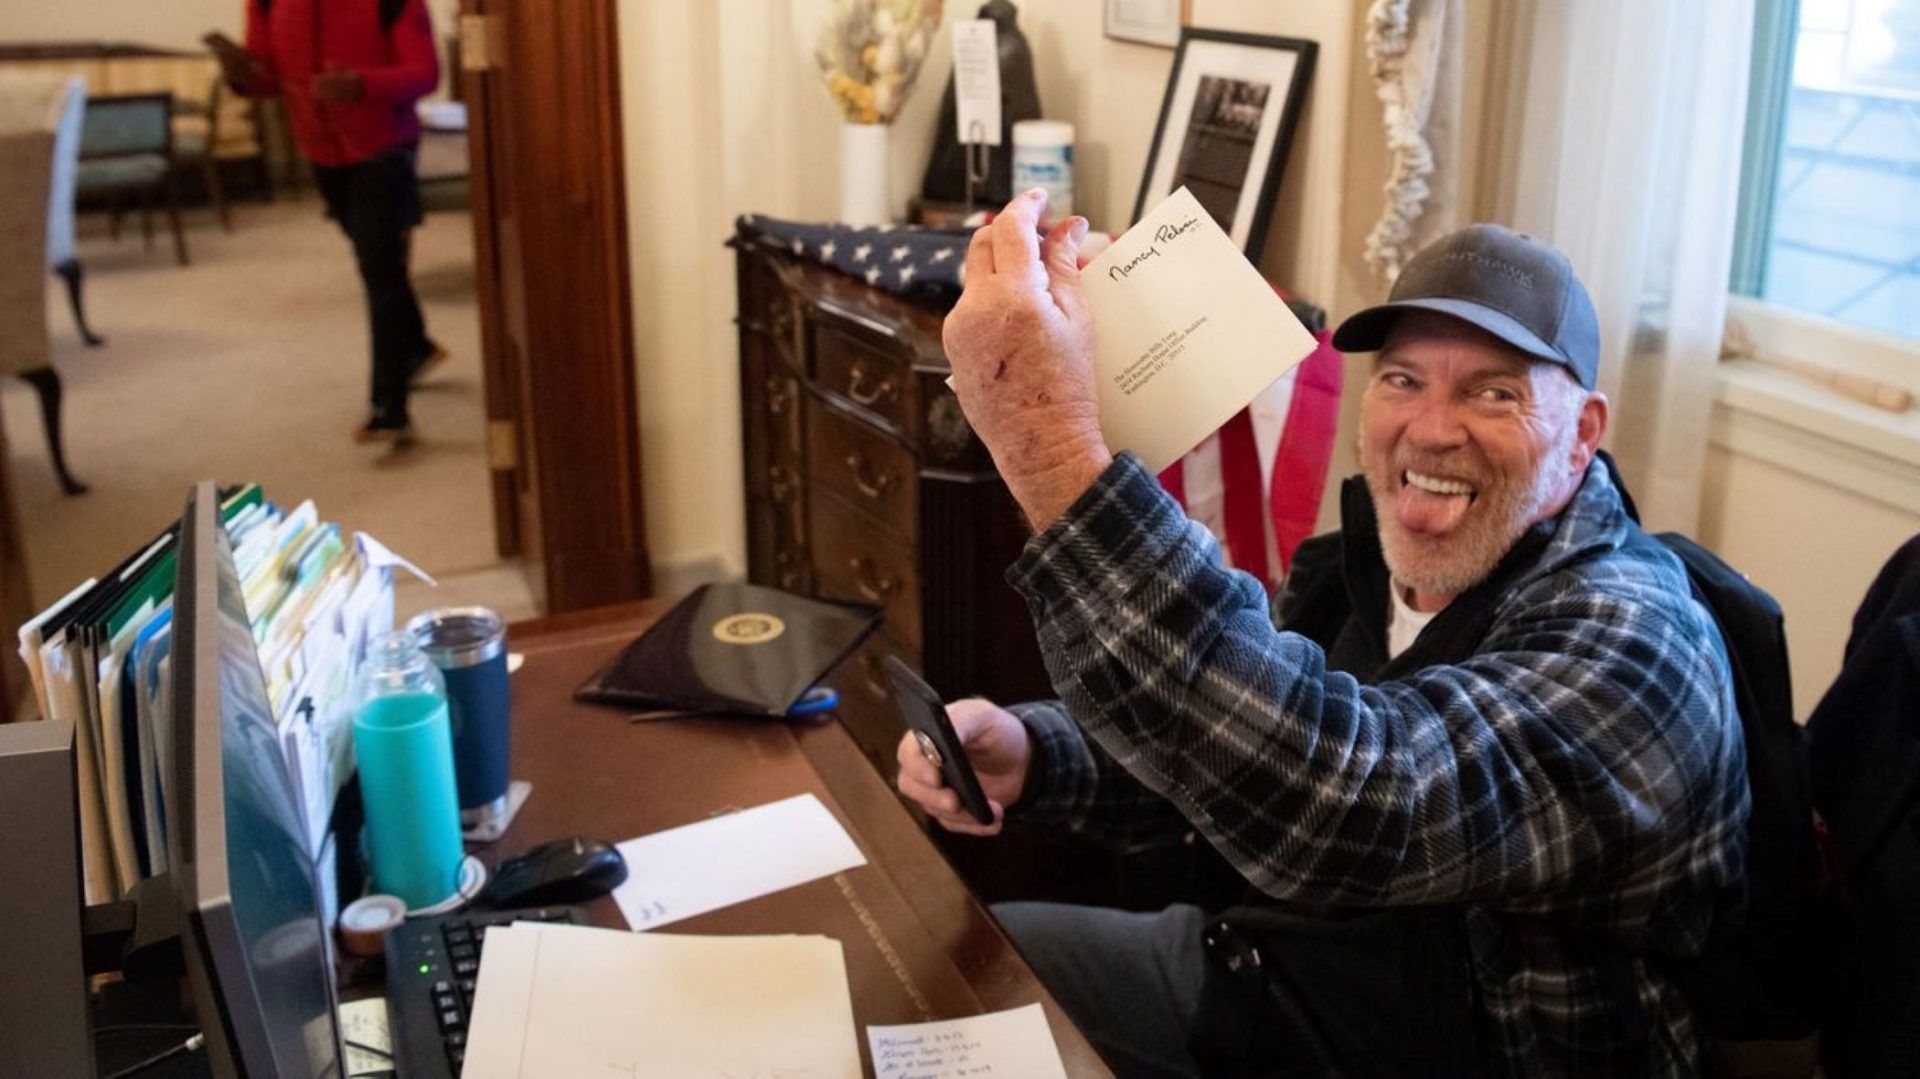 Richard Barnett, a supporter of President Trump, holds a piece of mail as he sits inside the office of Speaker of the House Nancy Pelosi after protesters breached the U.S. Capitol in Washington, D.C., on Jan. 6.